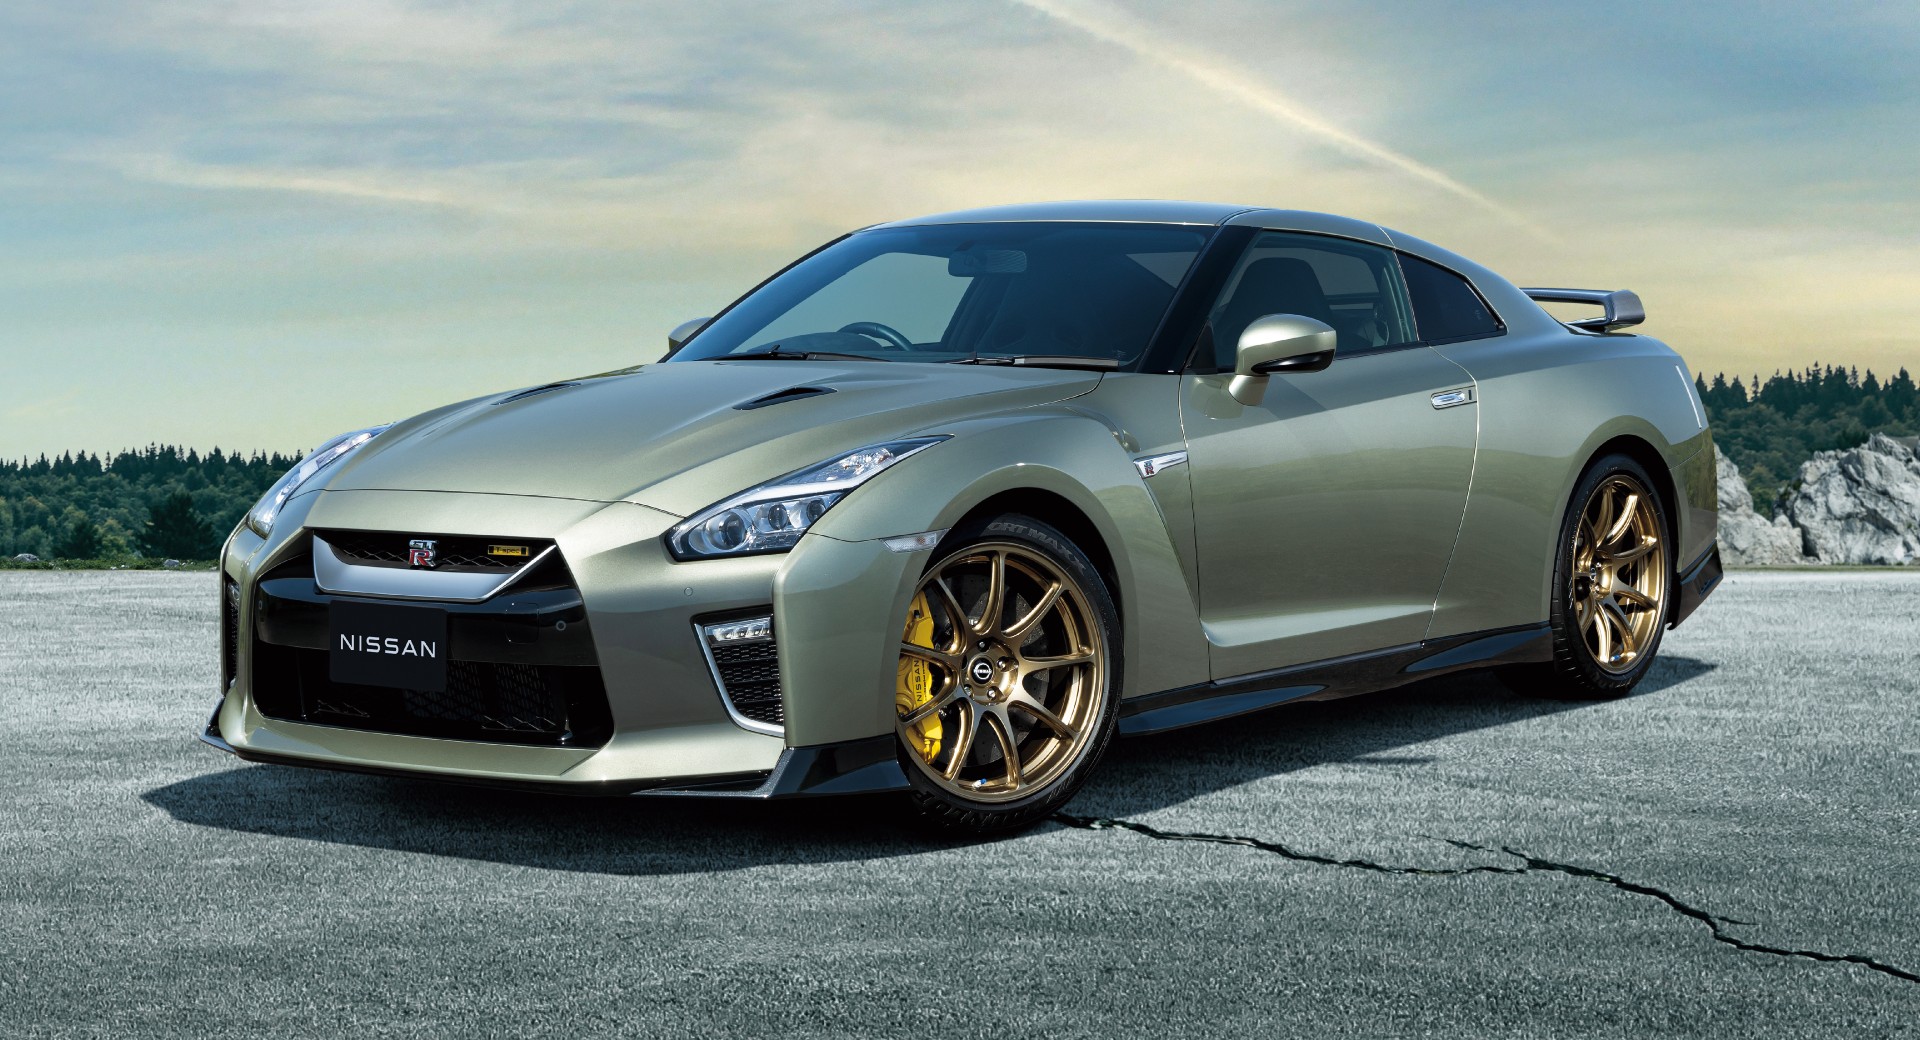 Nissan to launch Skyline NISMO models for the Japan market